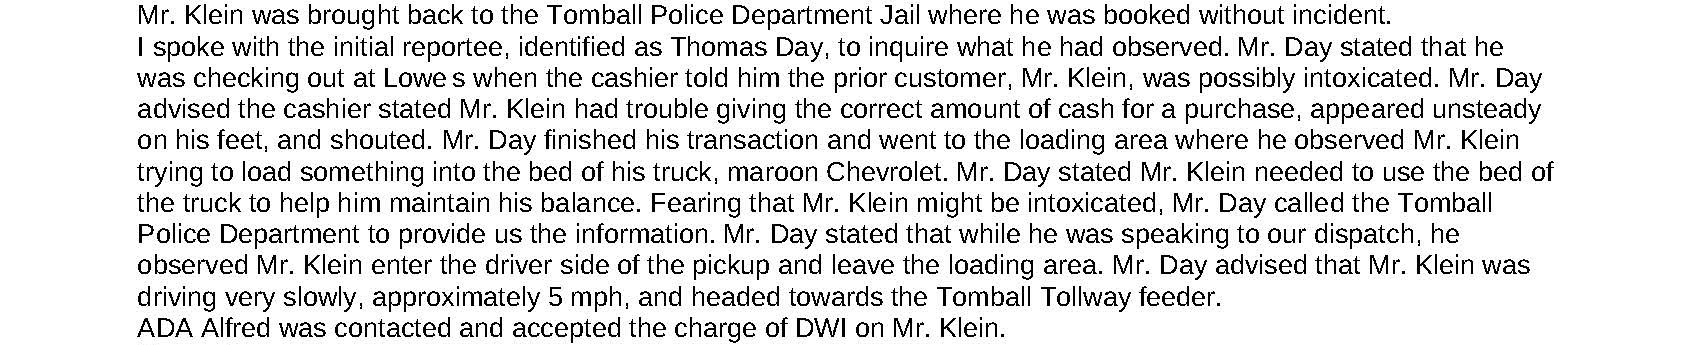 An excerpt from the report detailing the incident in which Walter Klein was arrested for a DWI in January 2018.